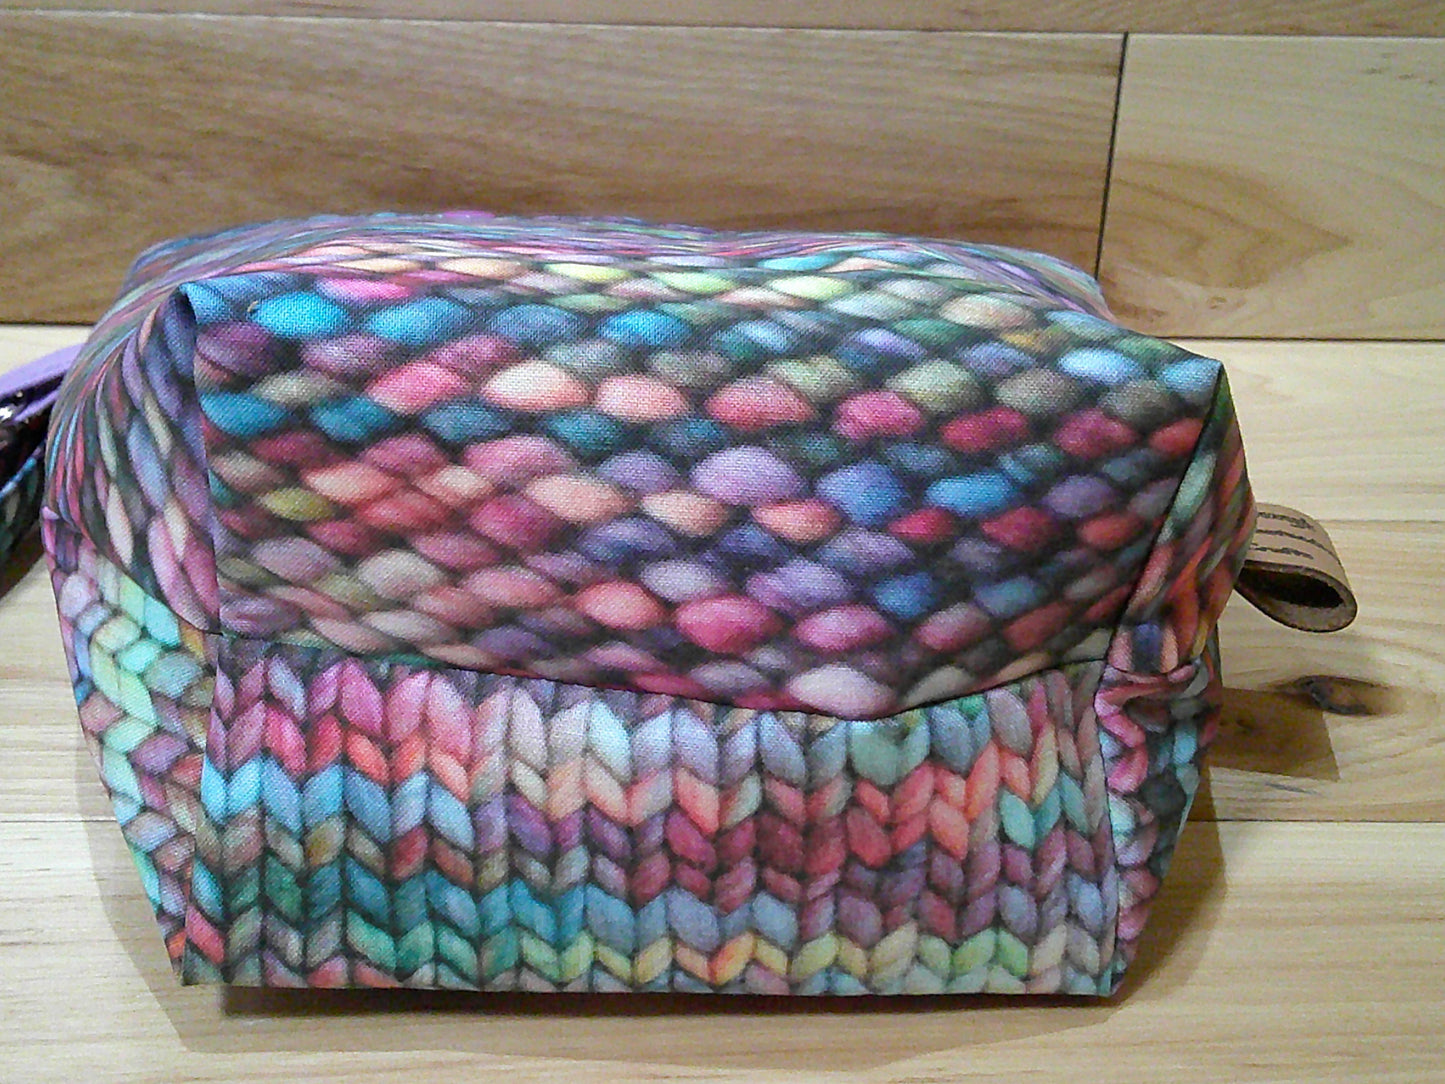 Knit & Purl project bags